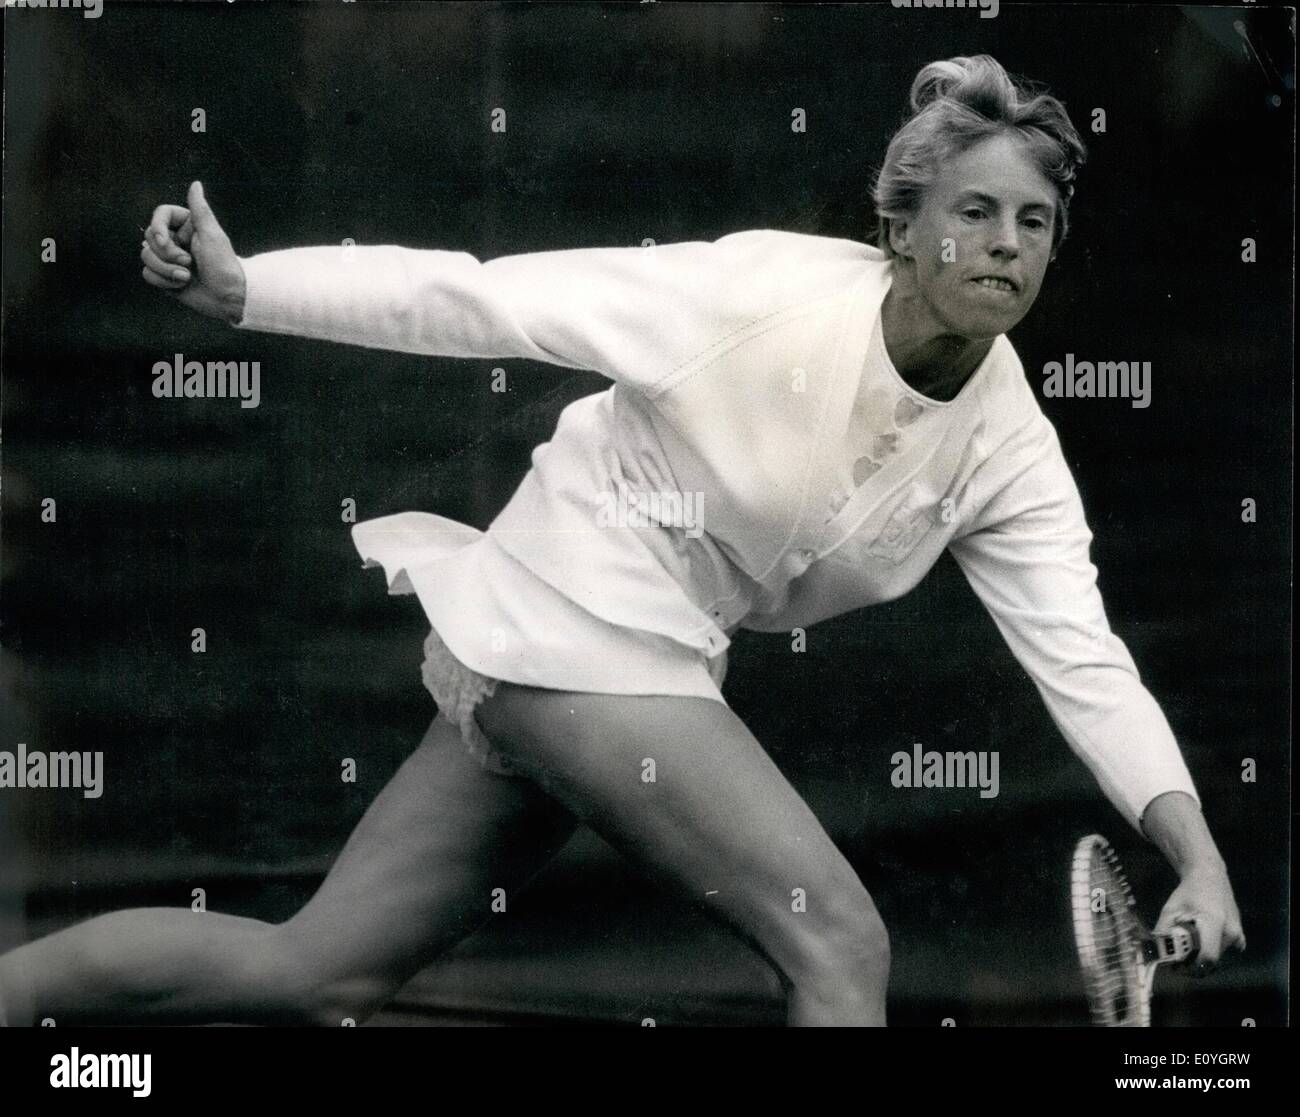 May 05, 1970 - Bio-Strath London hard court Tennis Championships at Hurlingham-Anne Jones wins Semi-final: Photo shows Anne Jones (GB) seen in a play against Evonne Goolagong (Australia) in the semifinal. Anne won after a three set struggle. Stock Photo